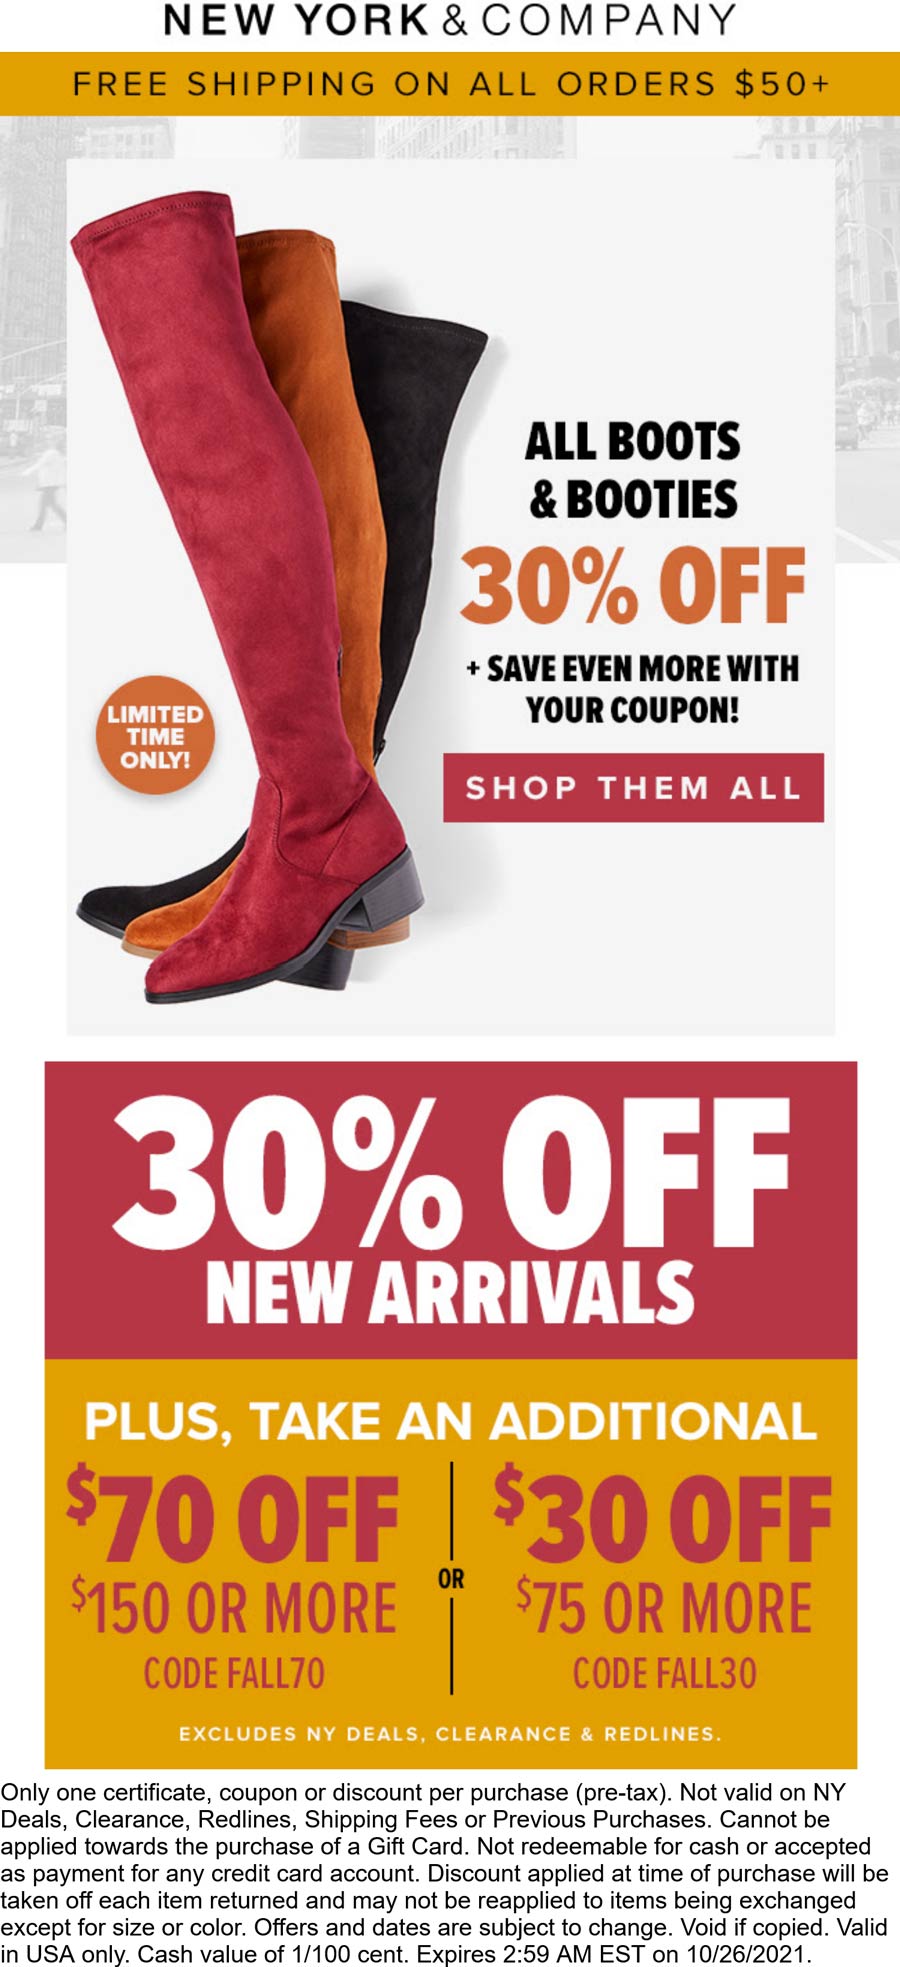 New York & Company stores Coupon  $30-$75 off $75+ & 30% off all boots today at New York & Company via promo code FALL30 #newyorkcompany 